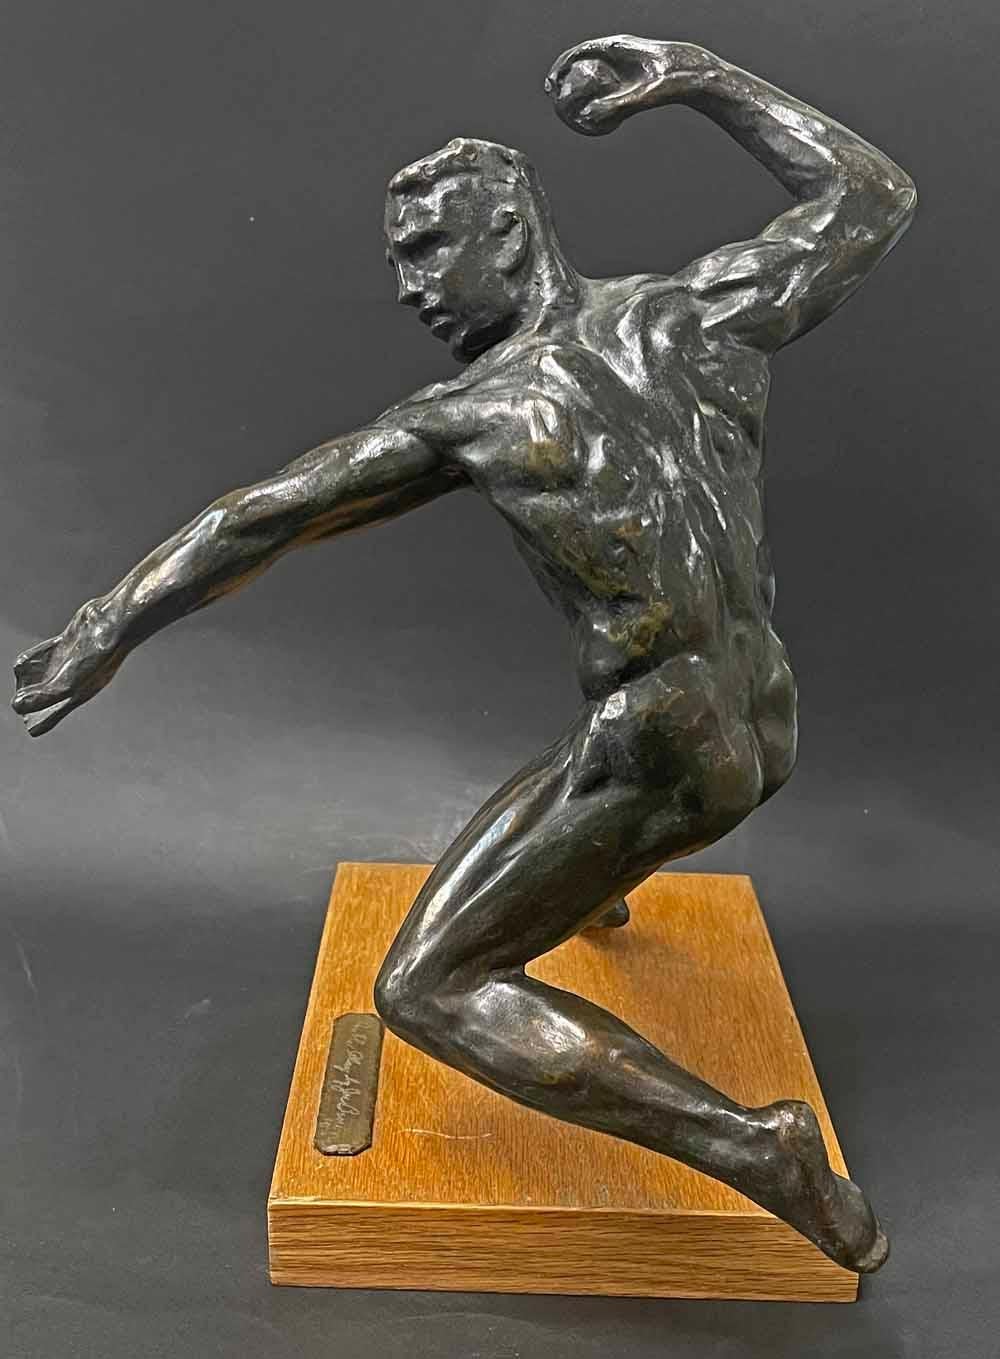 A brilliant piece of sculpture capturing one of the most dramatic moments in American baseball, this 1953 bronze by Joe Brown shows a baseball player touching second base with his right foot and readying to throw the ball to first base for the